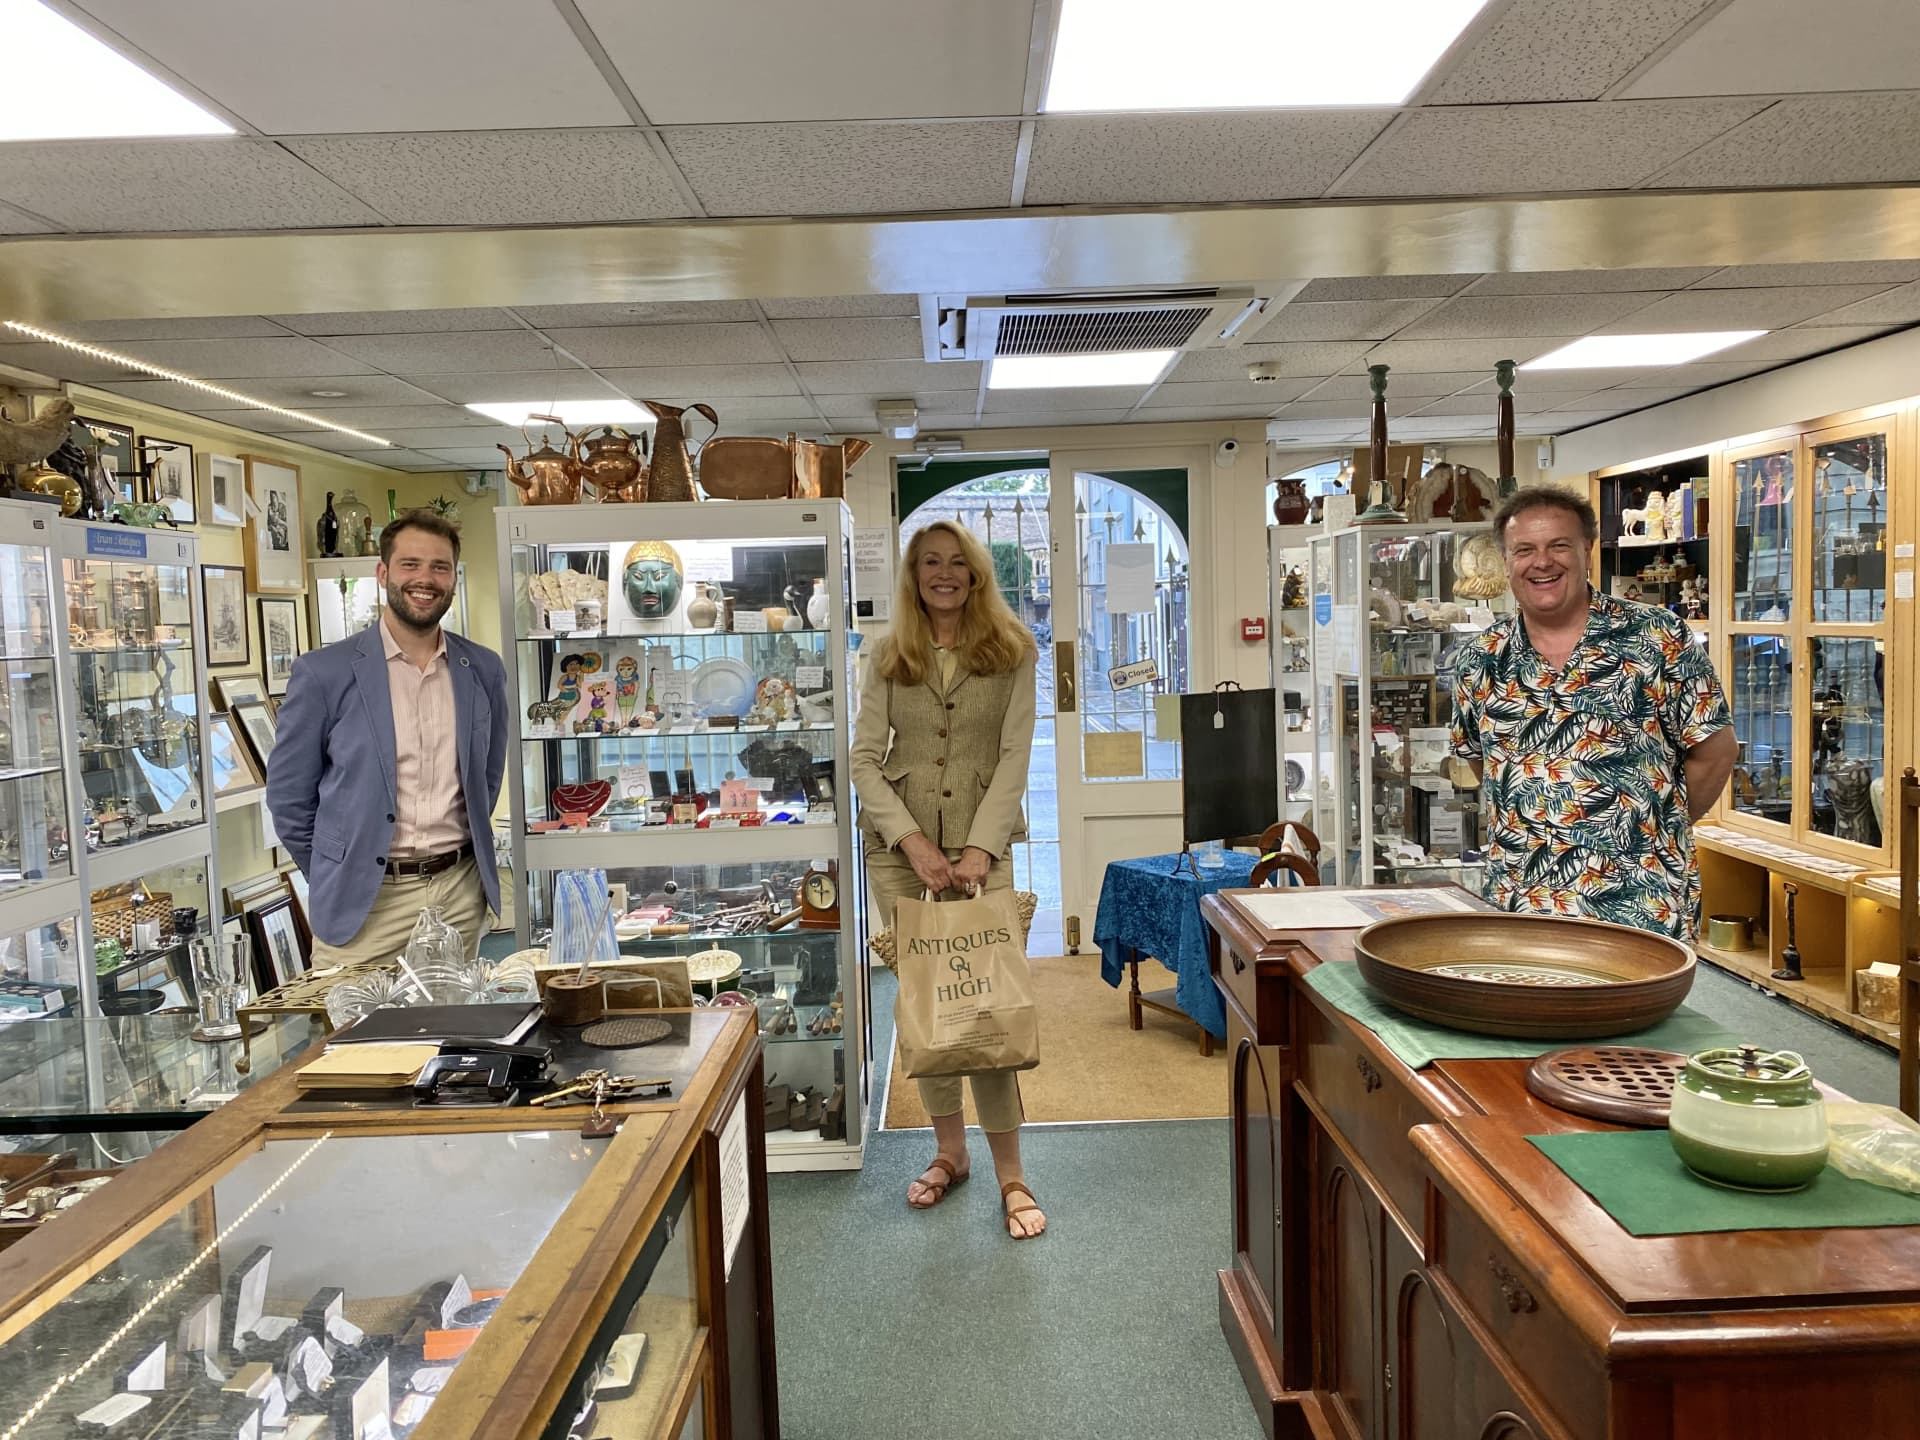 BBC Antiques road trip with Jerry Hall 27th July 2021